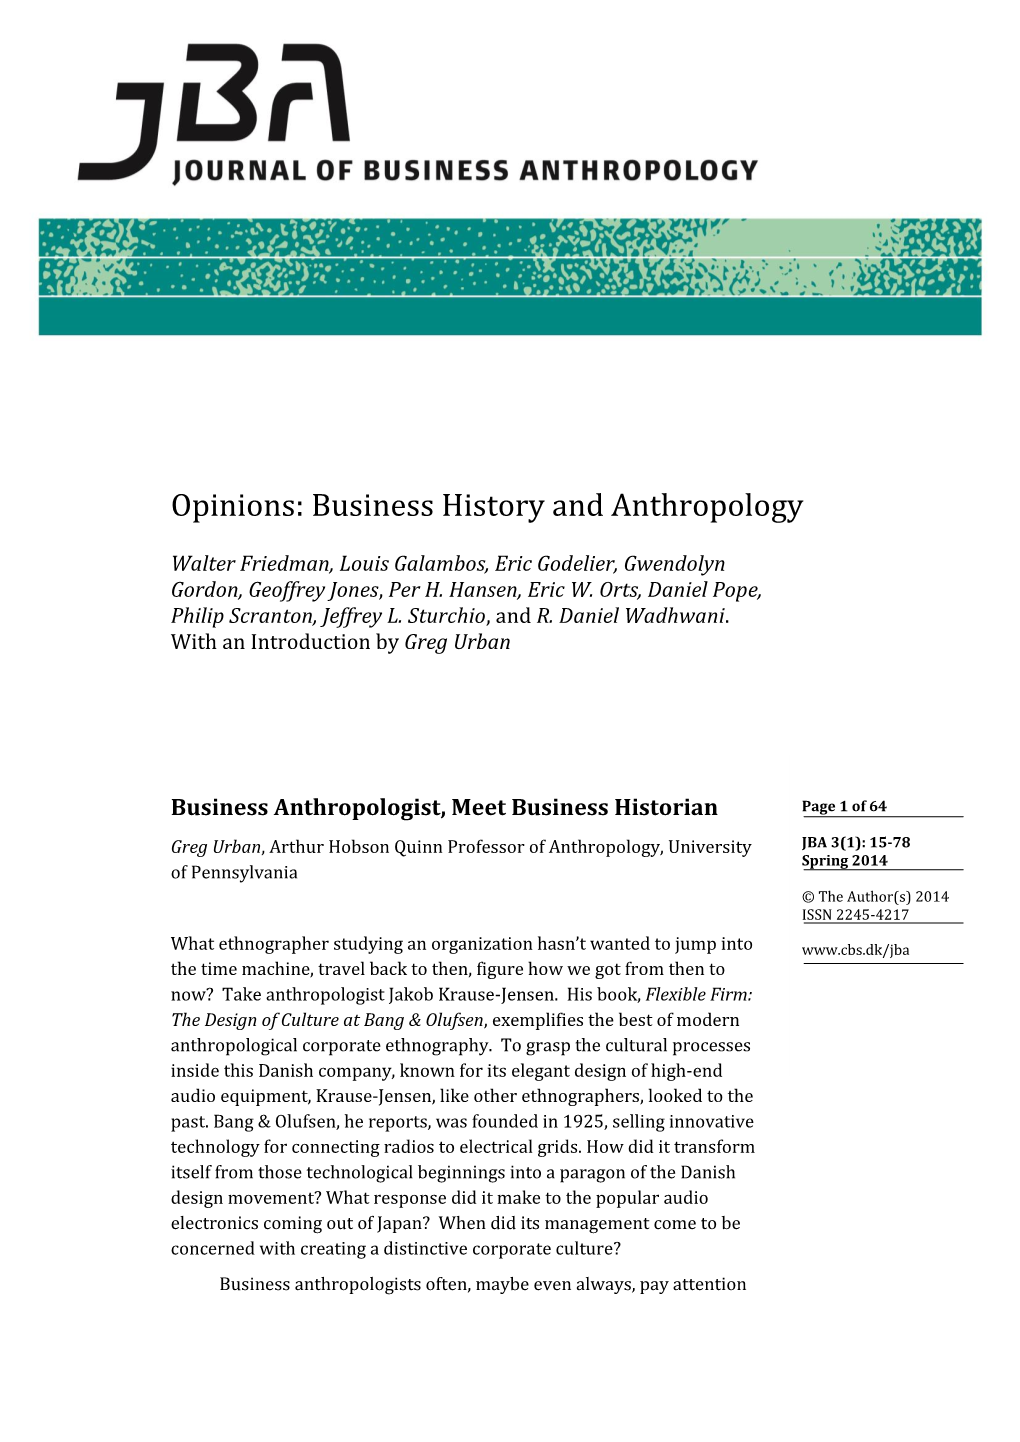 Business History and Anthropology